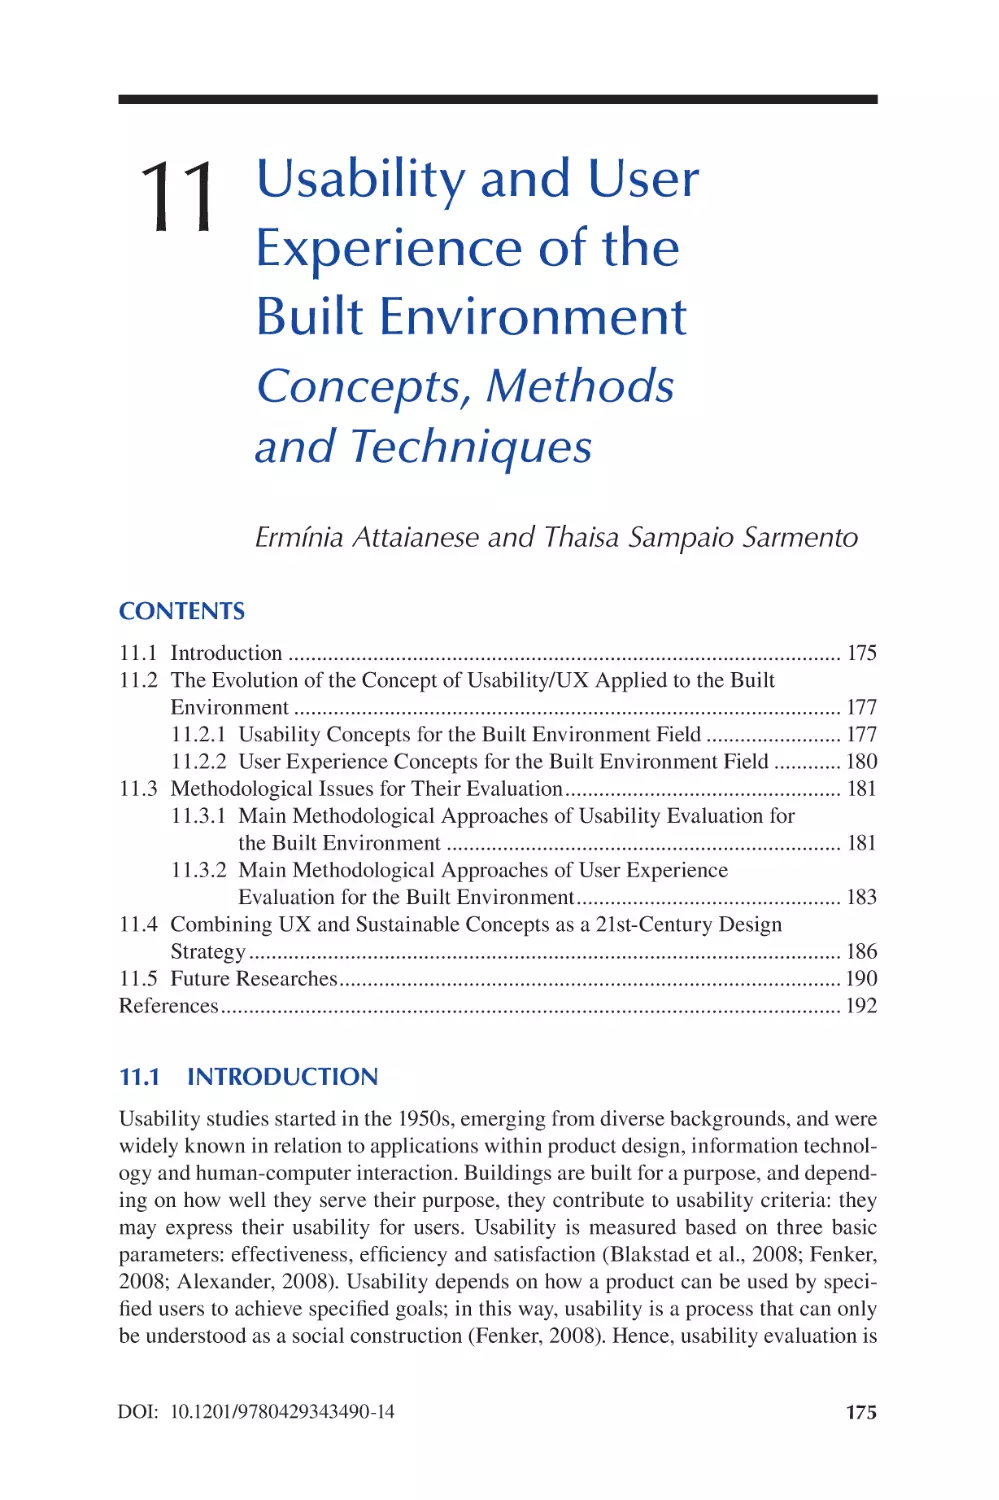 Chapter 11 Usability and User Experience of the Built Environment
11.1 Introduction